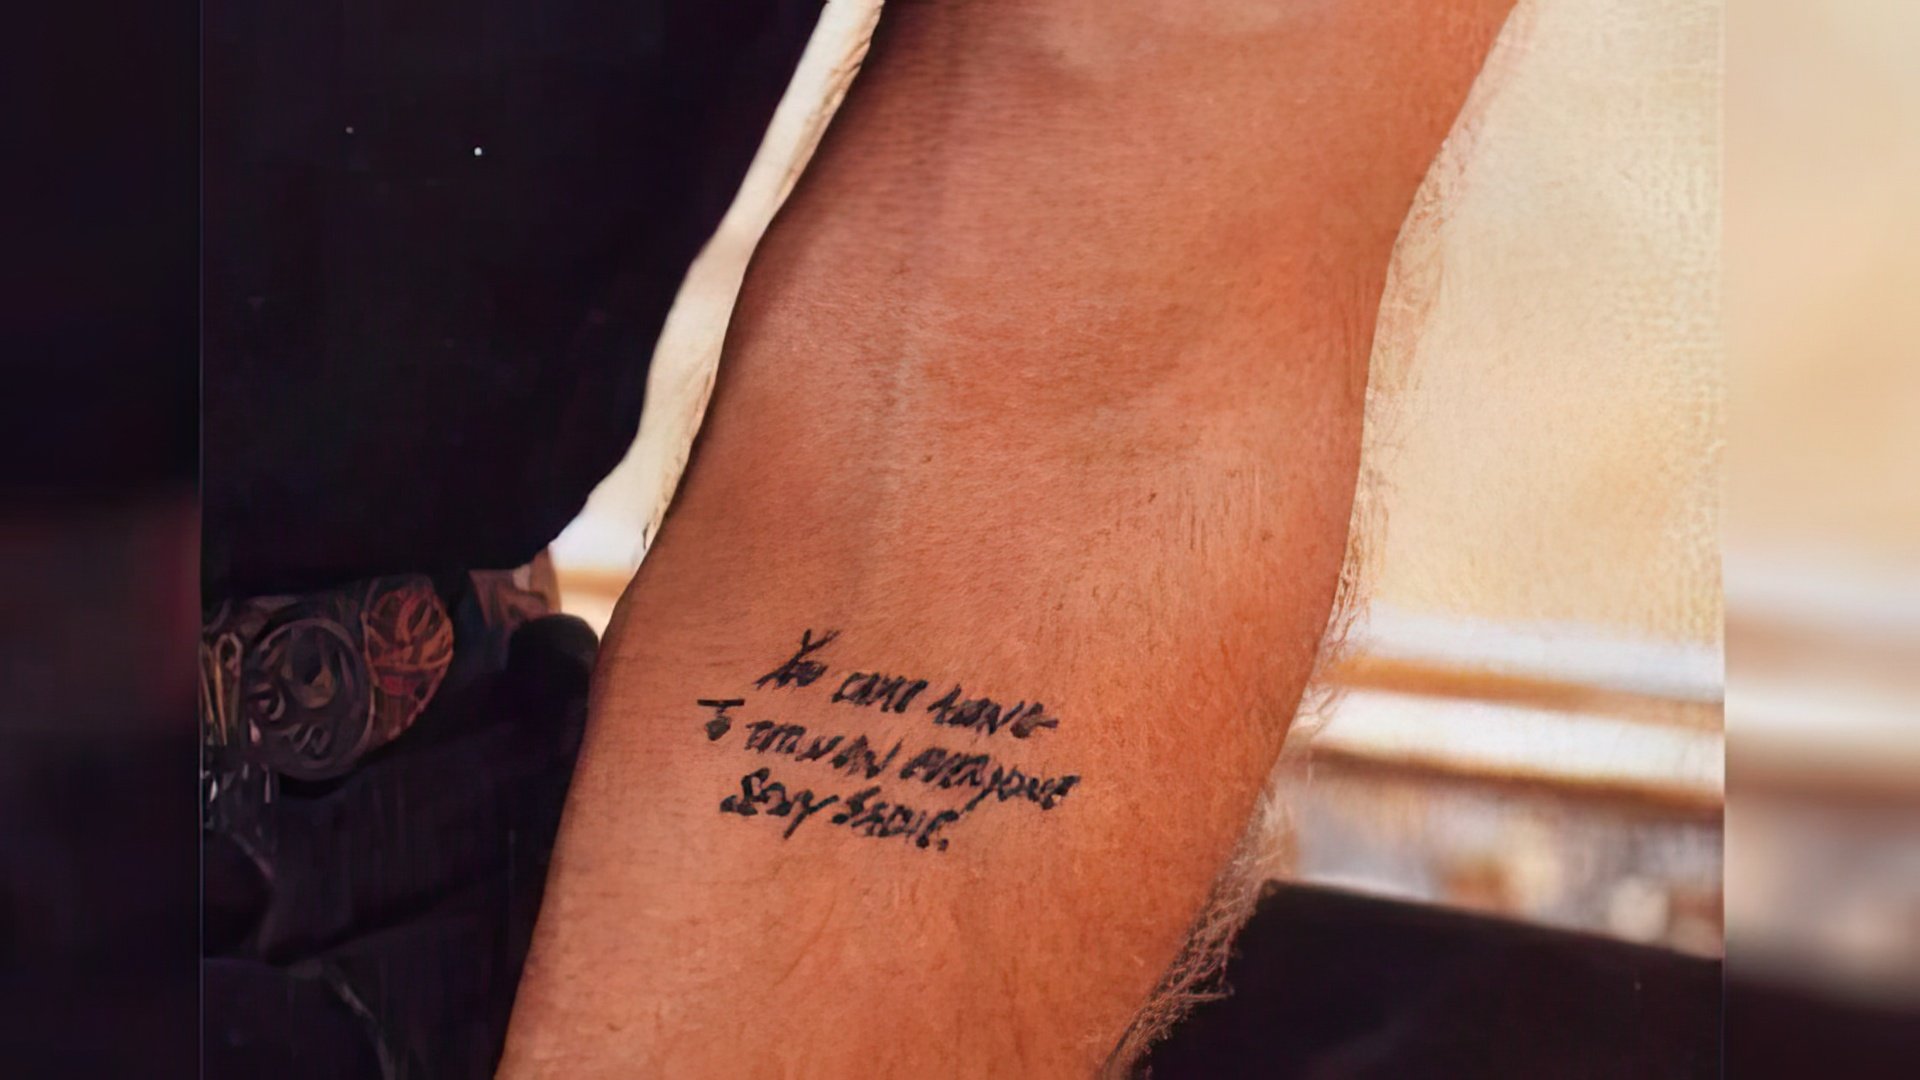 Jude Law’s tattoo dedicated to his first wife